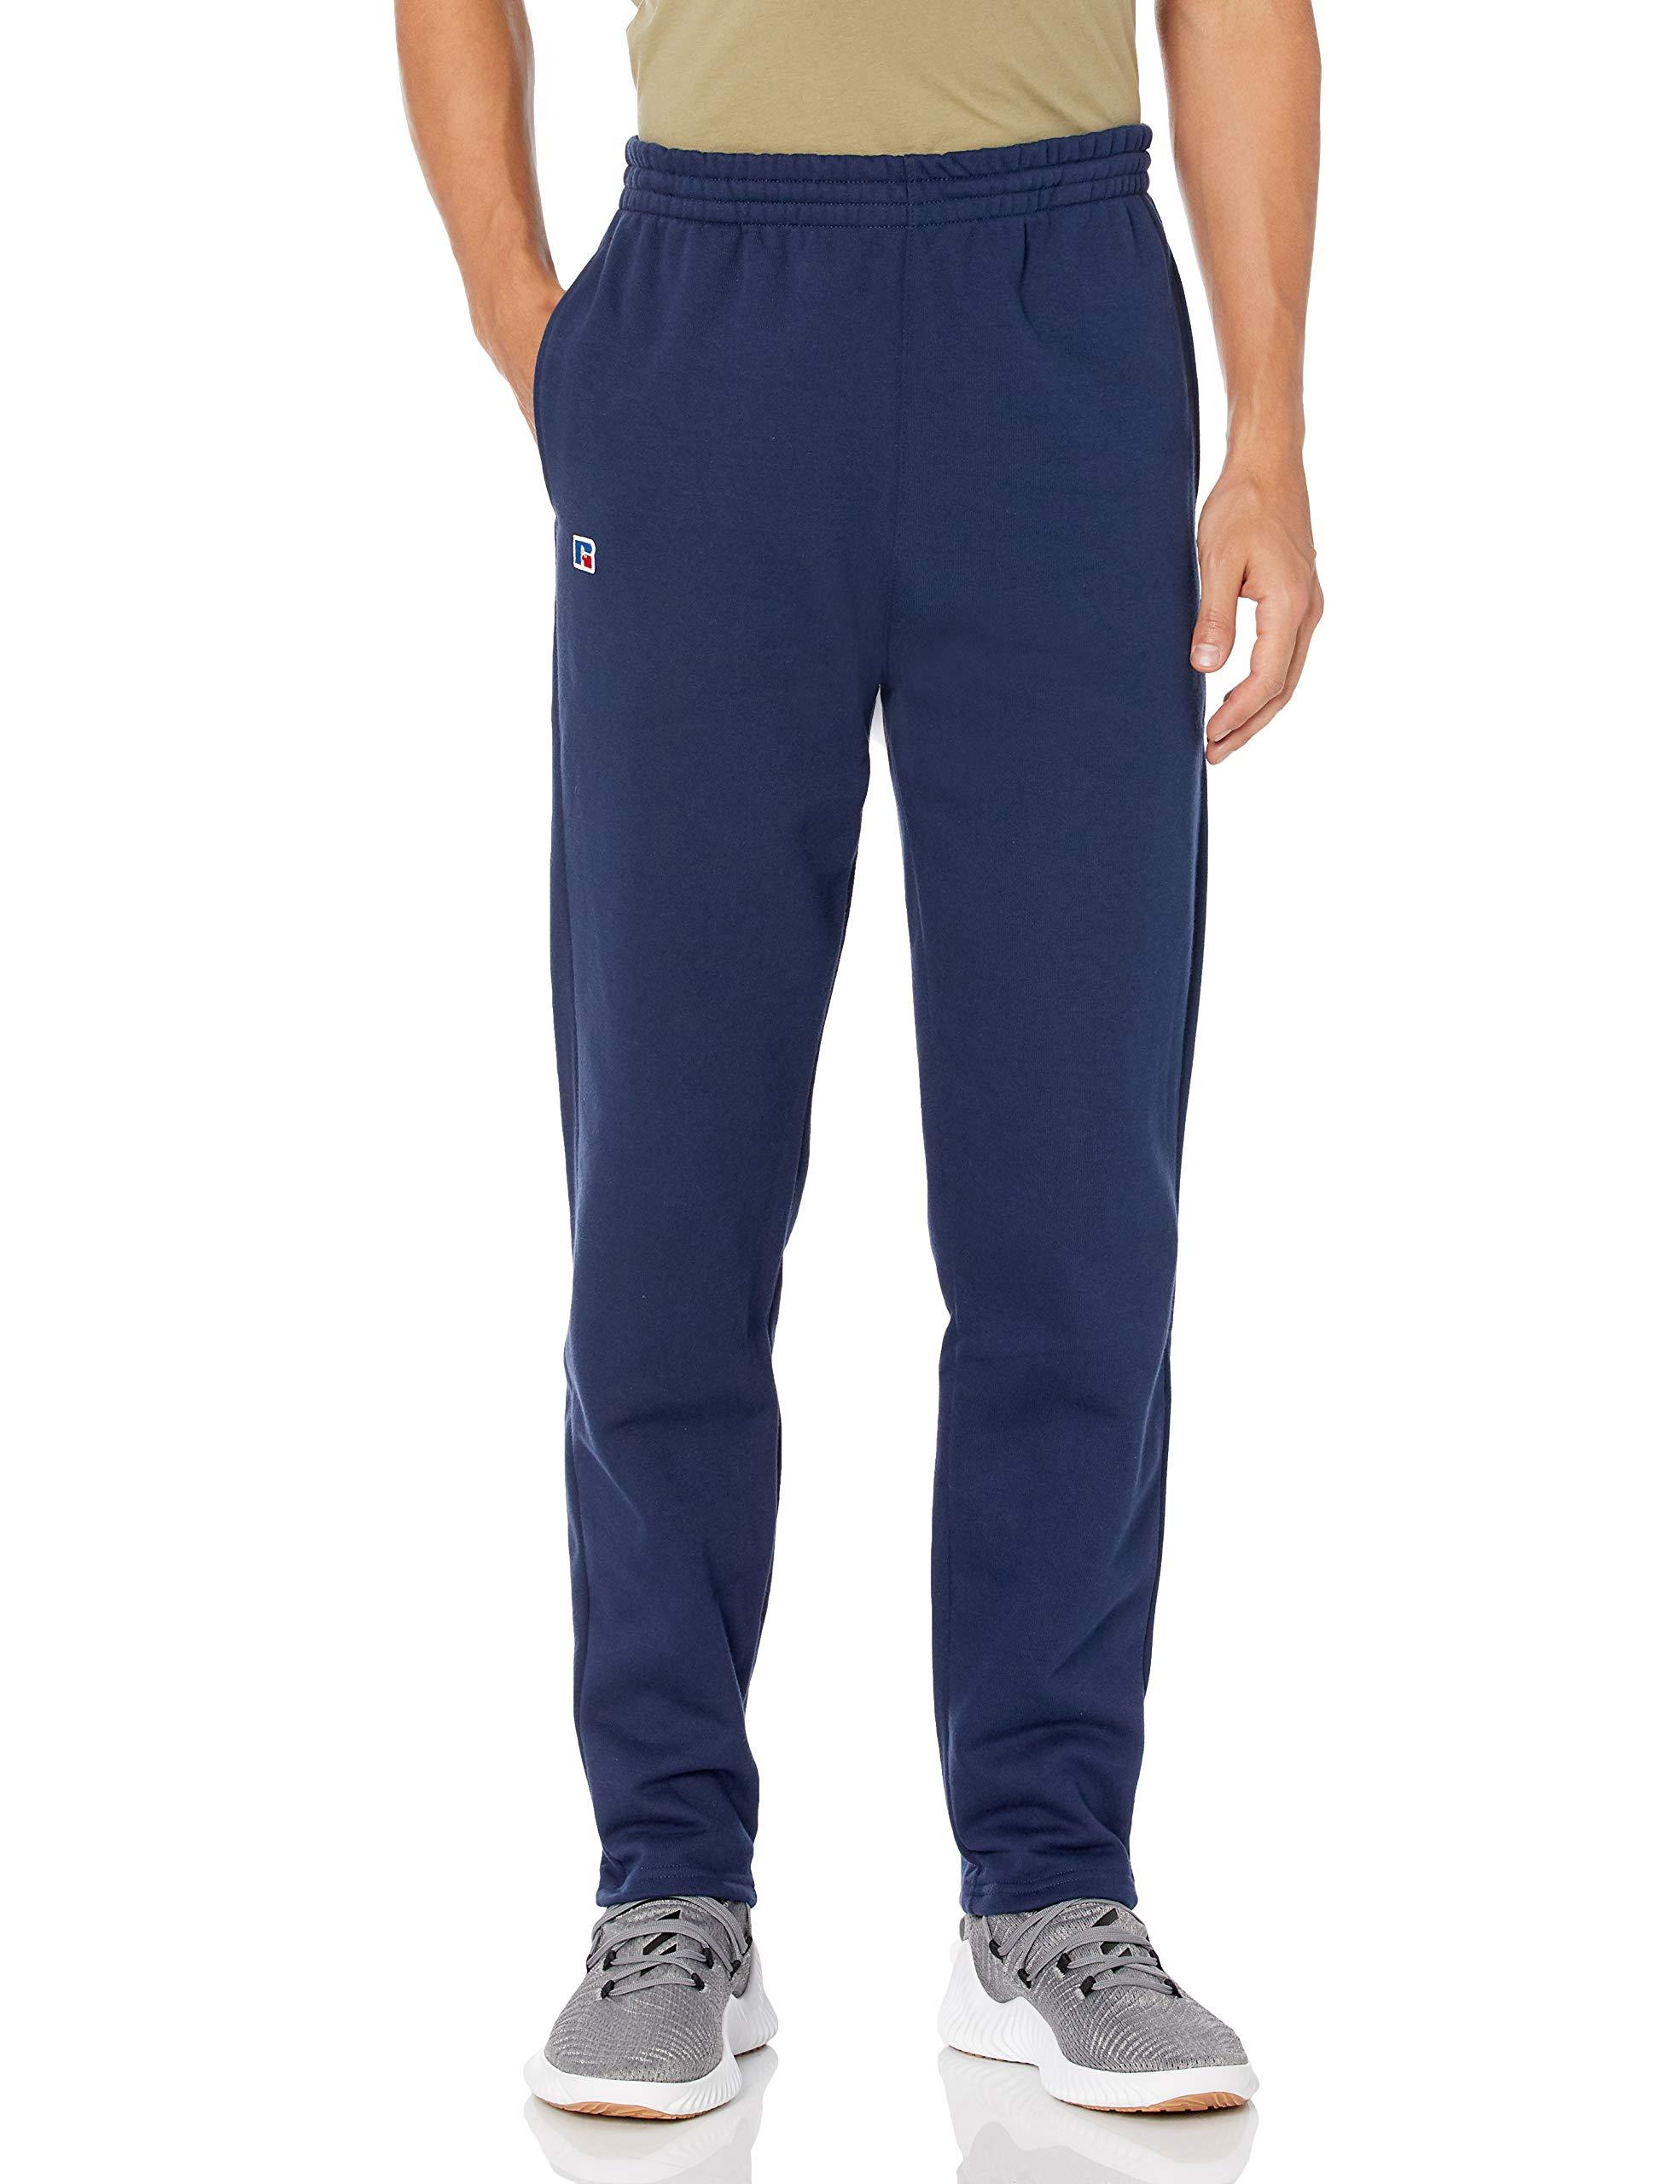 Russell Athletic Mens Cotton Rich 2.0 Premium Fleece Sweatpants in Navy ...